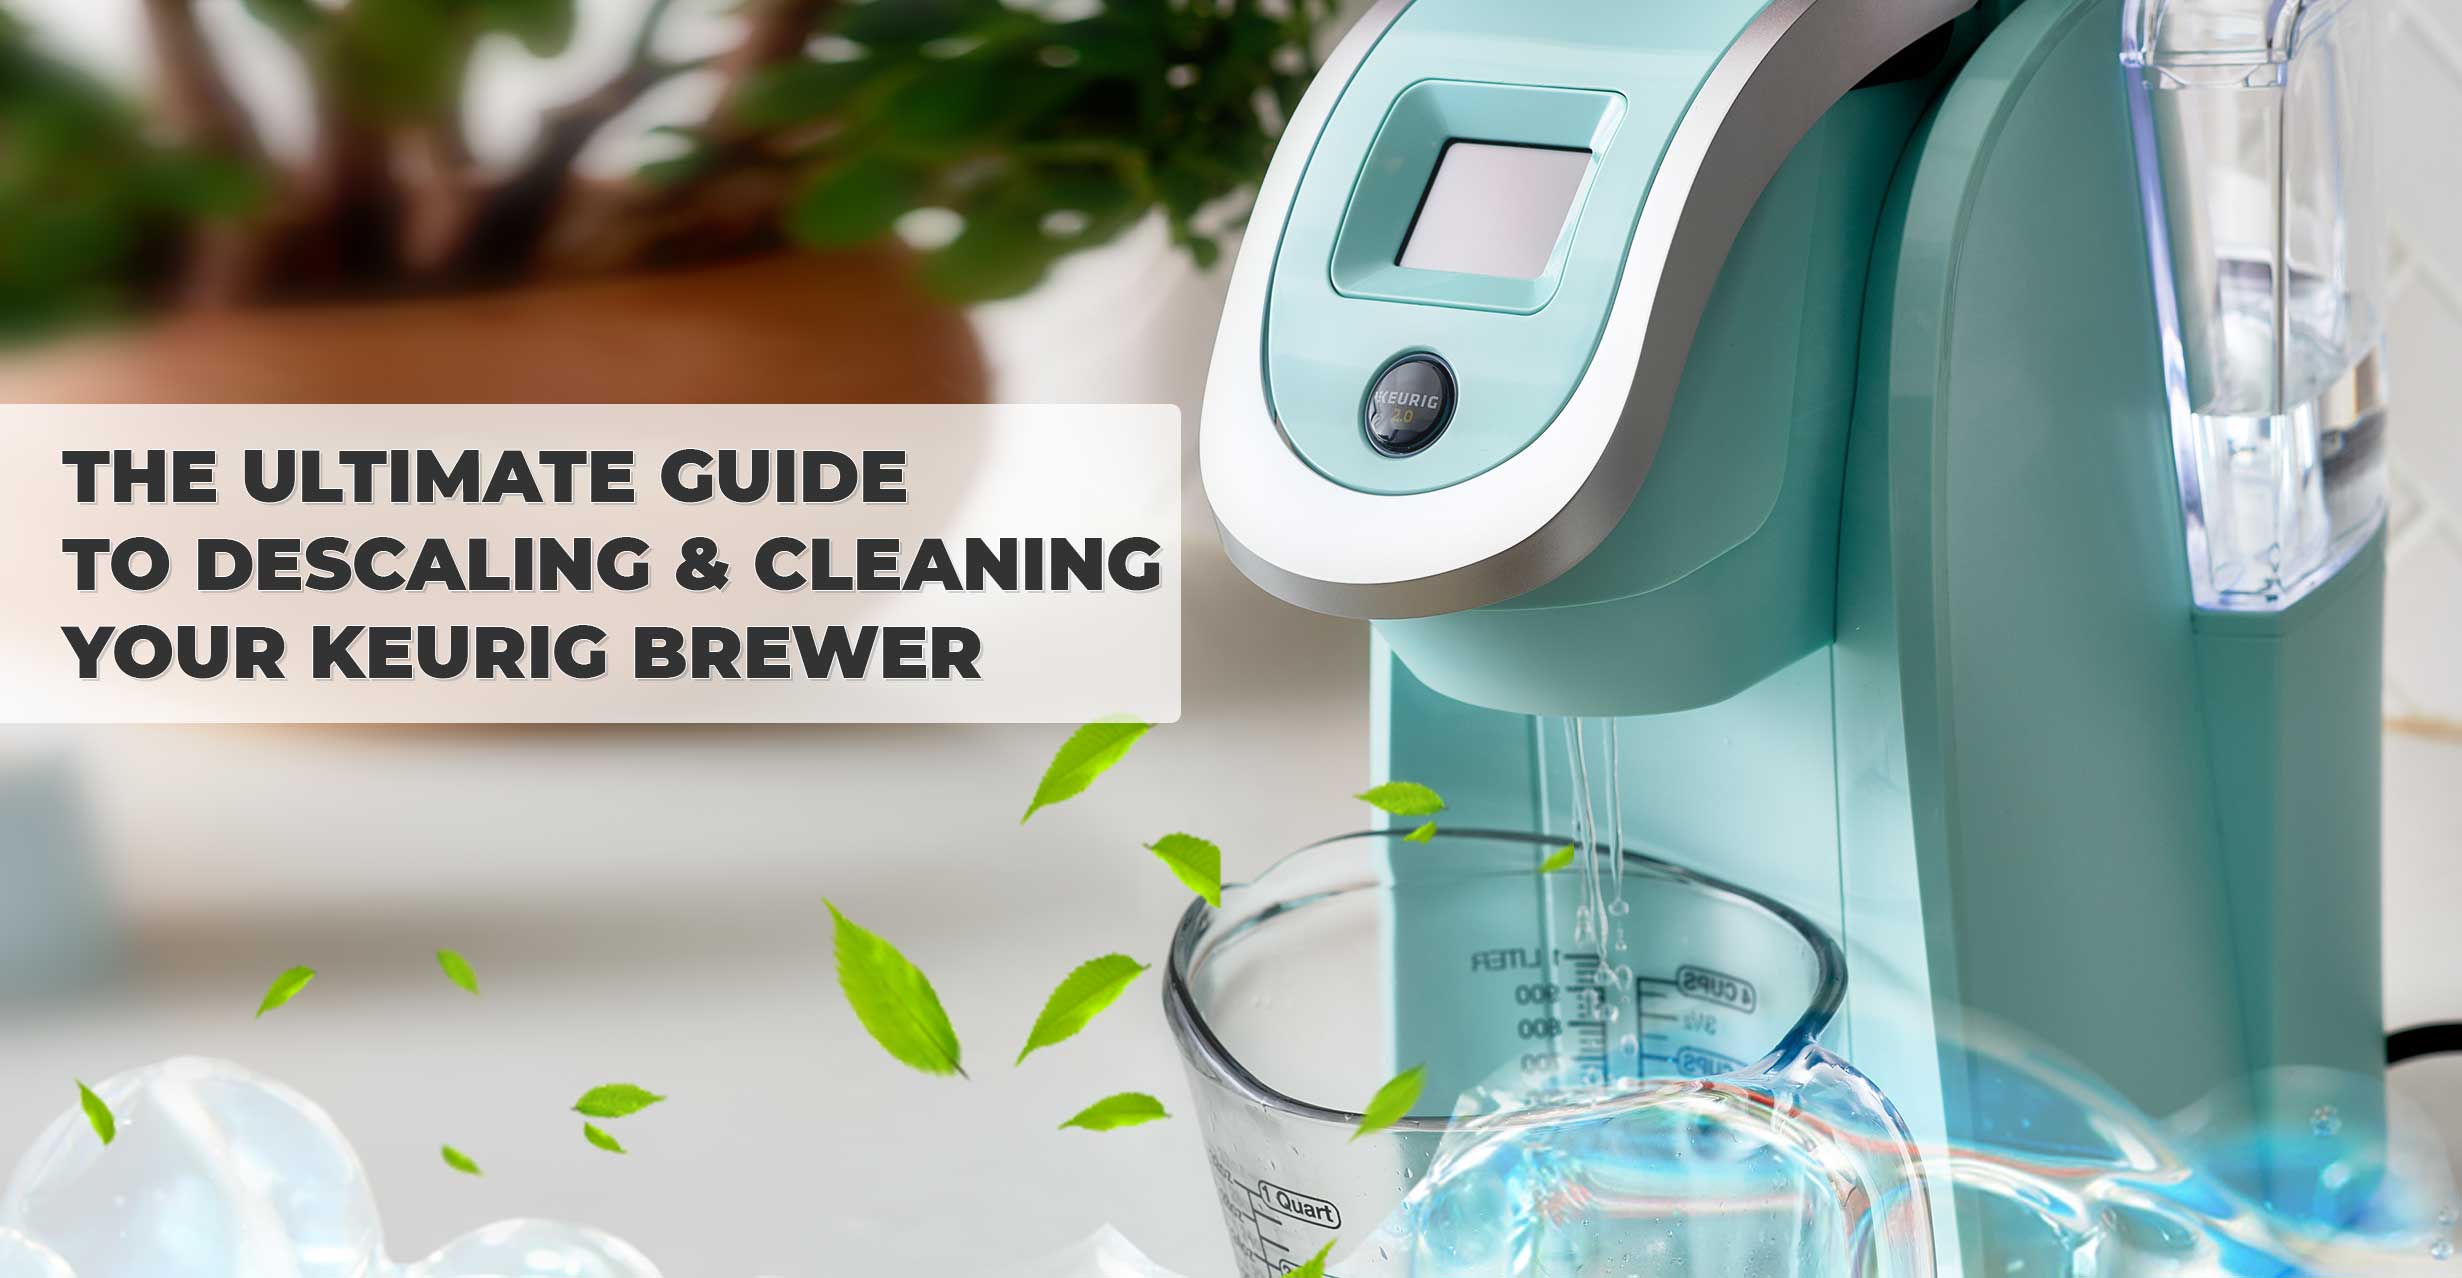 https://sollowellness.com/cdn/shop/articles/The-Ultimate-Guide-to-Descaling-and-Cleaning--Your-Keurig-Brewer-With-XROM.jpg?v=1685479310